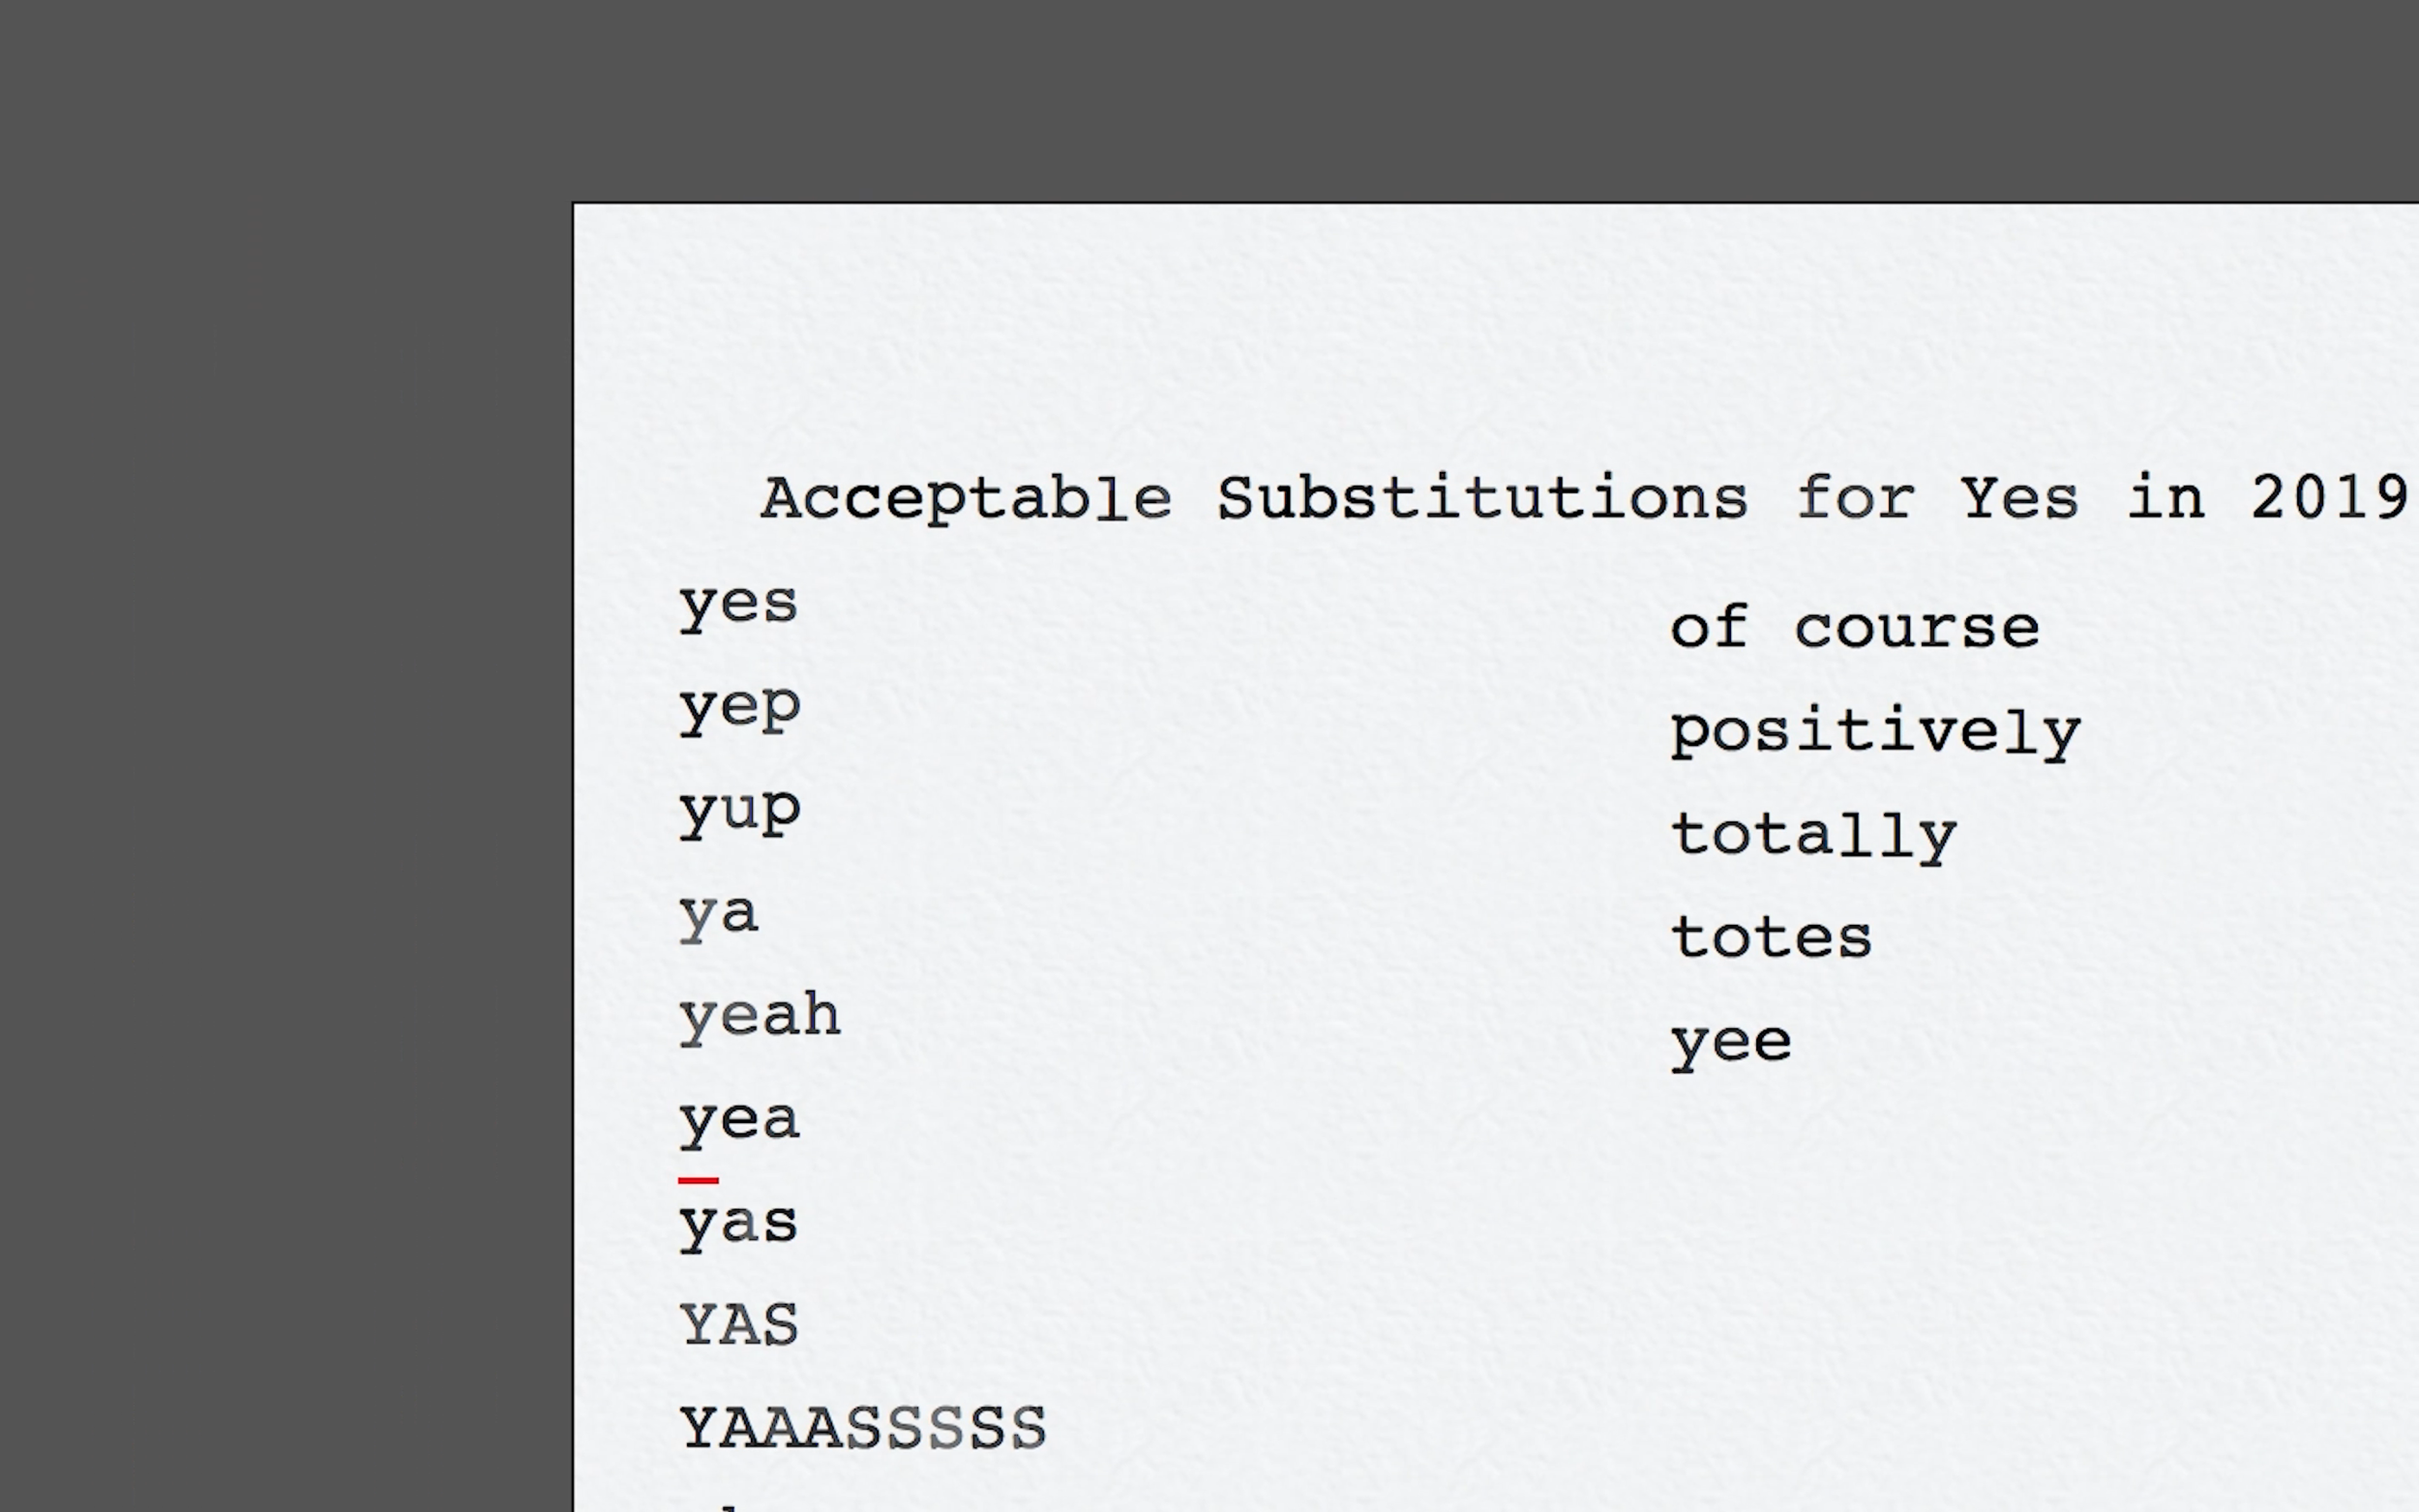 ACCEPTABLE SUBSTITUTIONS FOR YES IN 2019 (Copy)